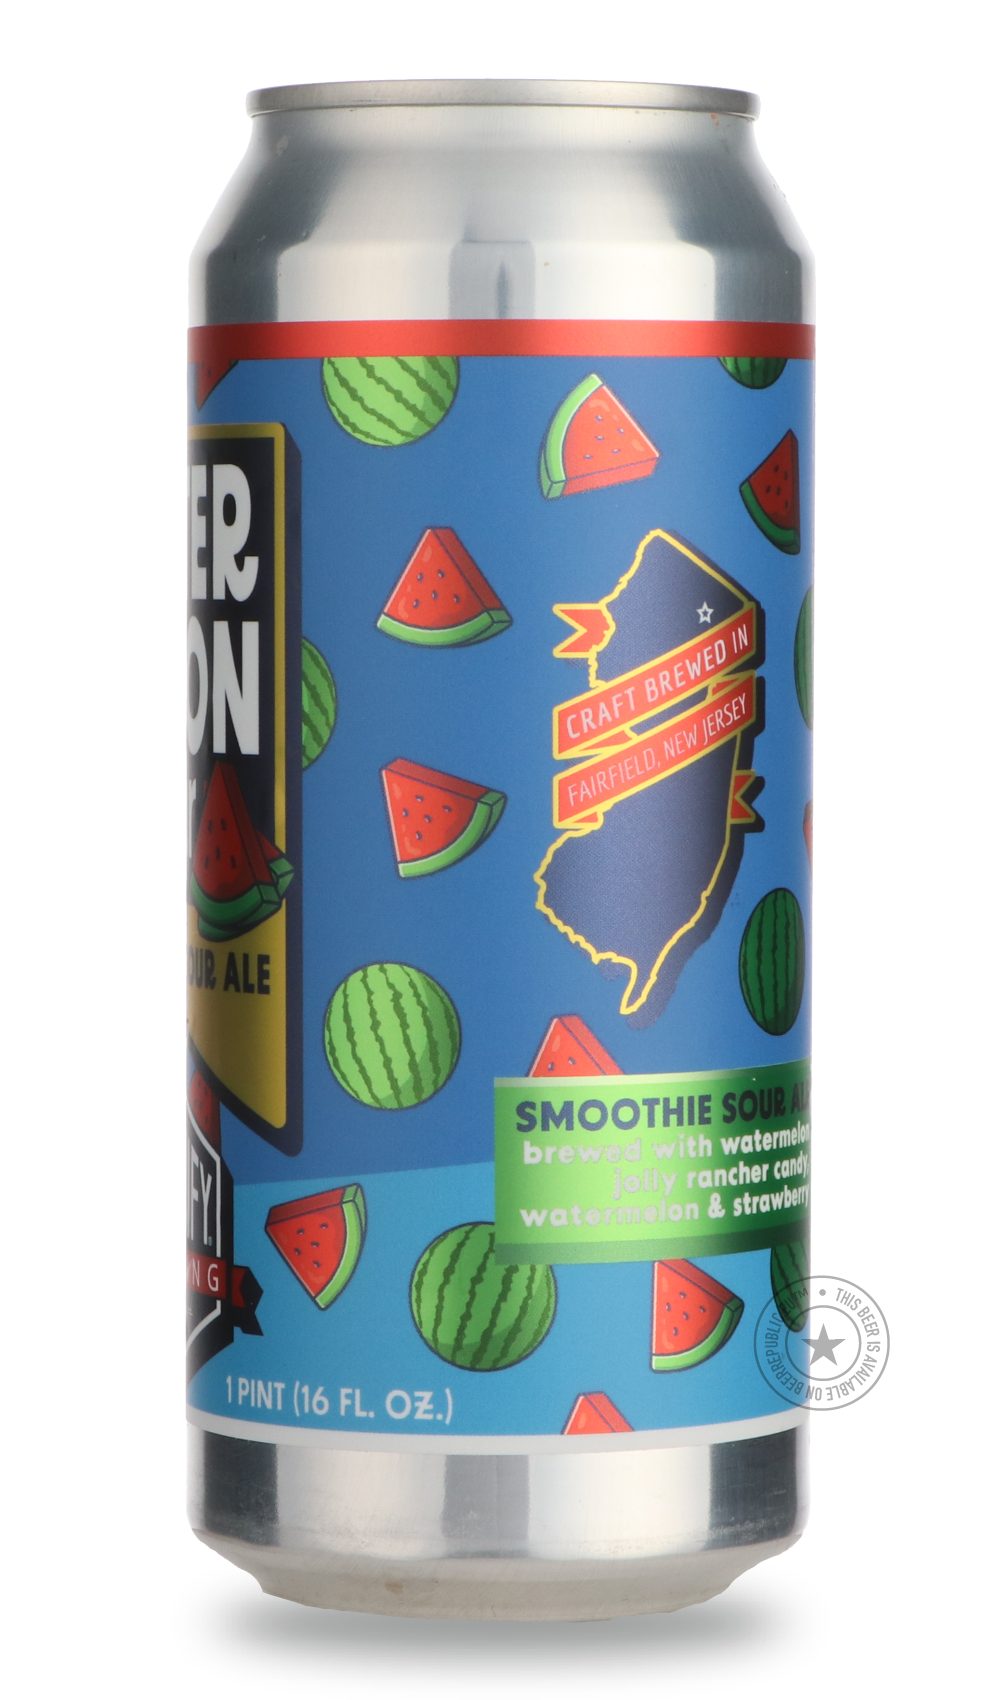 -Magnify- Watermelon Sugar-Sour / Wild & Fruity- Only @ Beer Republic - The best online beer store for American & Canadian craft beer - Buy beer online from the USA and Canada - Bier online kopen - Amerikaans bier kopen - Craft beer store - Craft beer kopen - Amerikanisch bier kaufen - Bier online kaufen - Acheter biere online - IPA - Stout - Porter - New England IPA - Hazy IPA - Imperial Stout - Barrel Aged - Barrel Aged Imperial Stout - Brown - Dark beer - Blond - Blonde - Pilsner - Lager - Wheat - Weizen